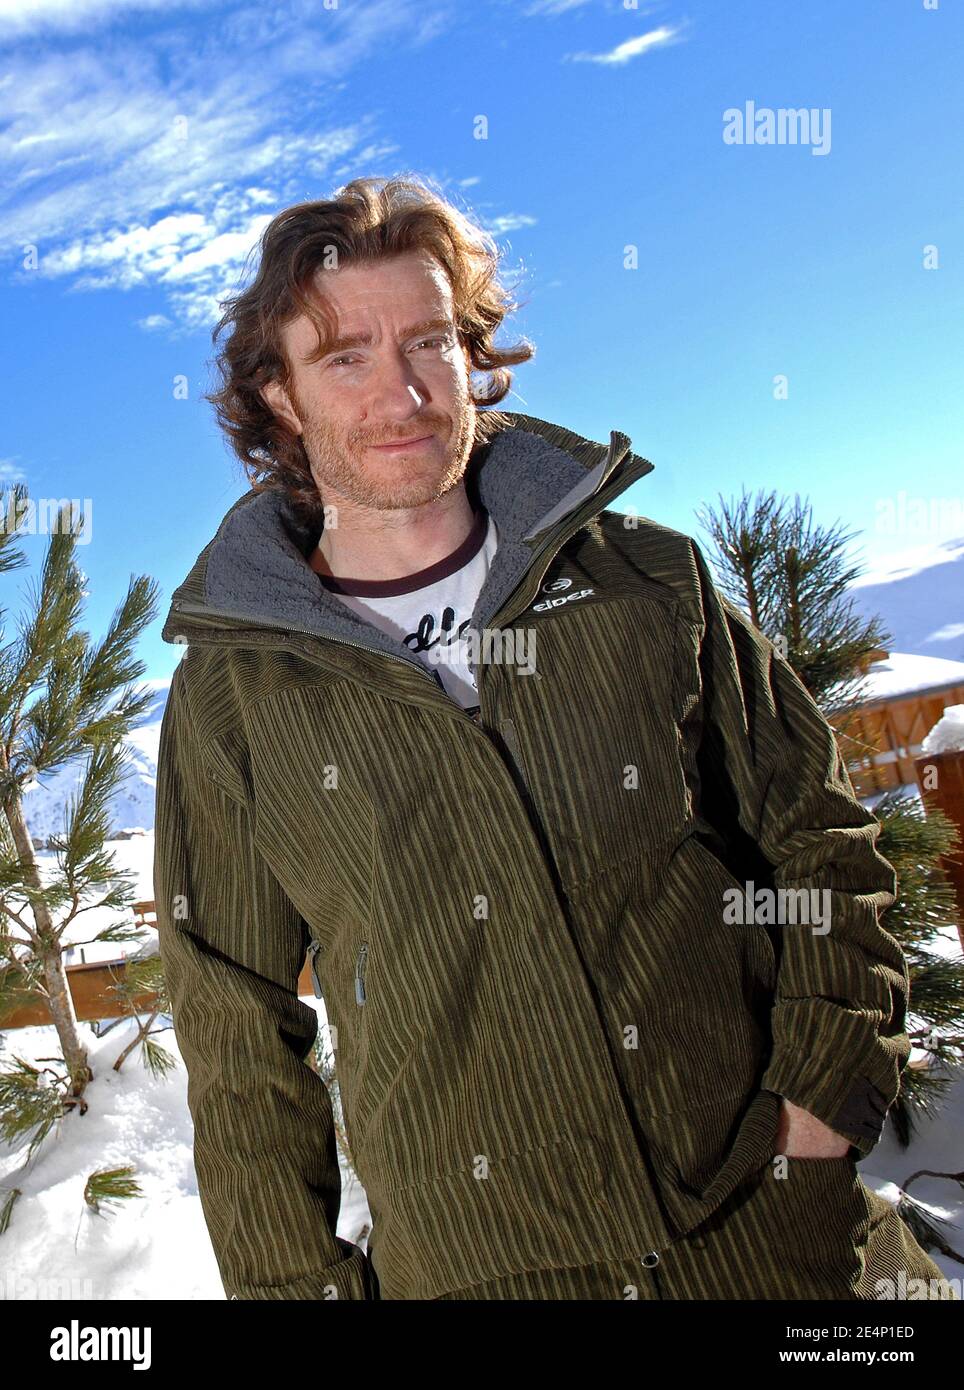 French actor Thierry Fremont during the 11th International Comedy Film Festival in L'Alpe d'Huez, France on January 18, 2008. Photo by Christophe Guibbaud/ABACAPRESS.COM Stock Photo